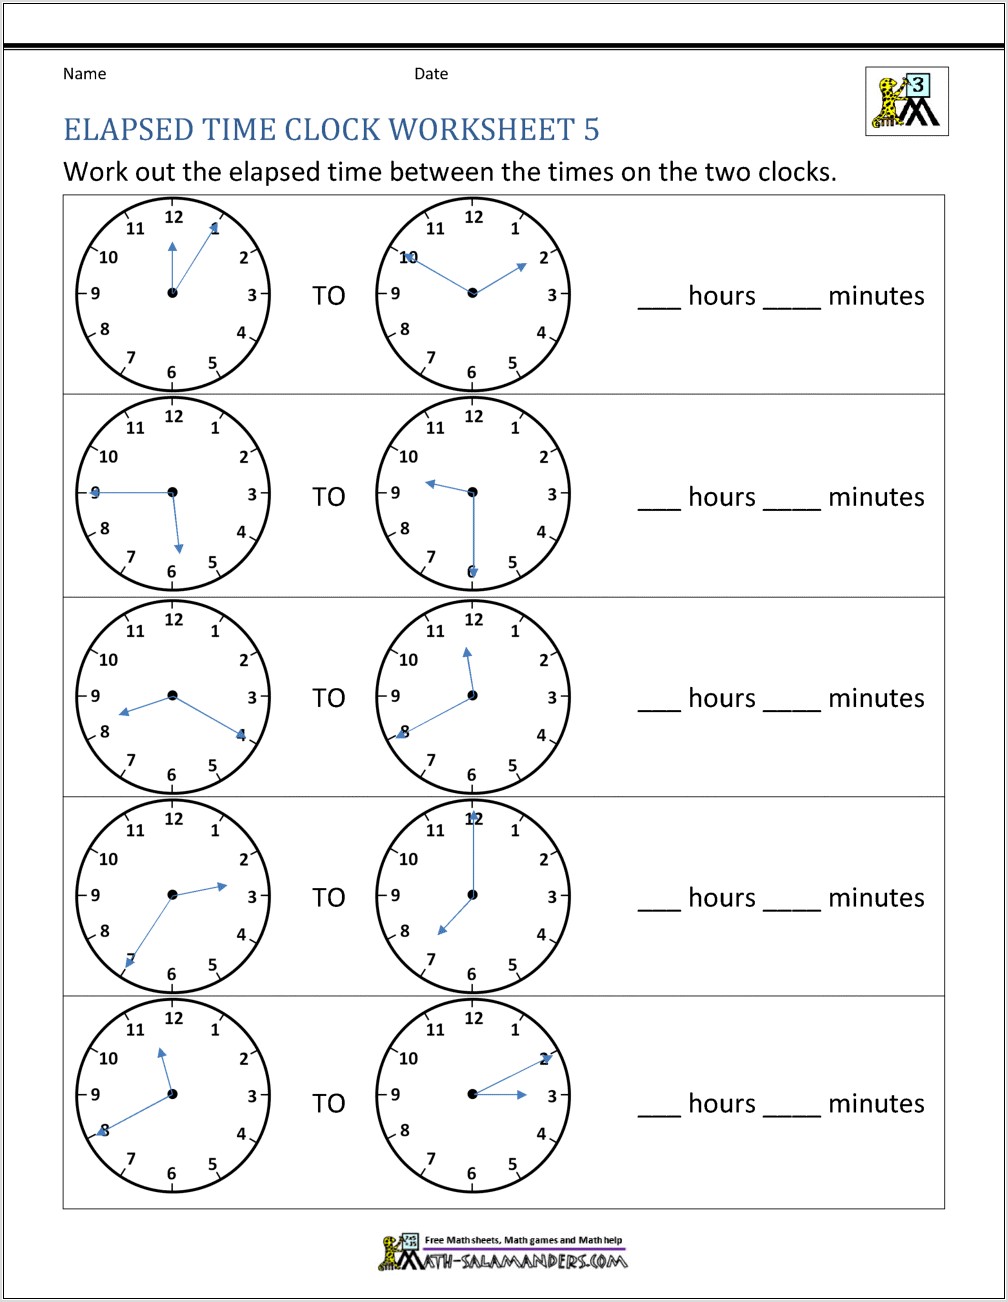 Worksheet On Time And Work